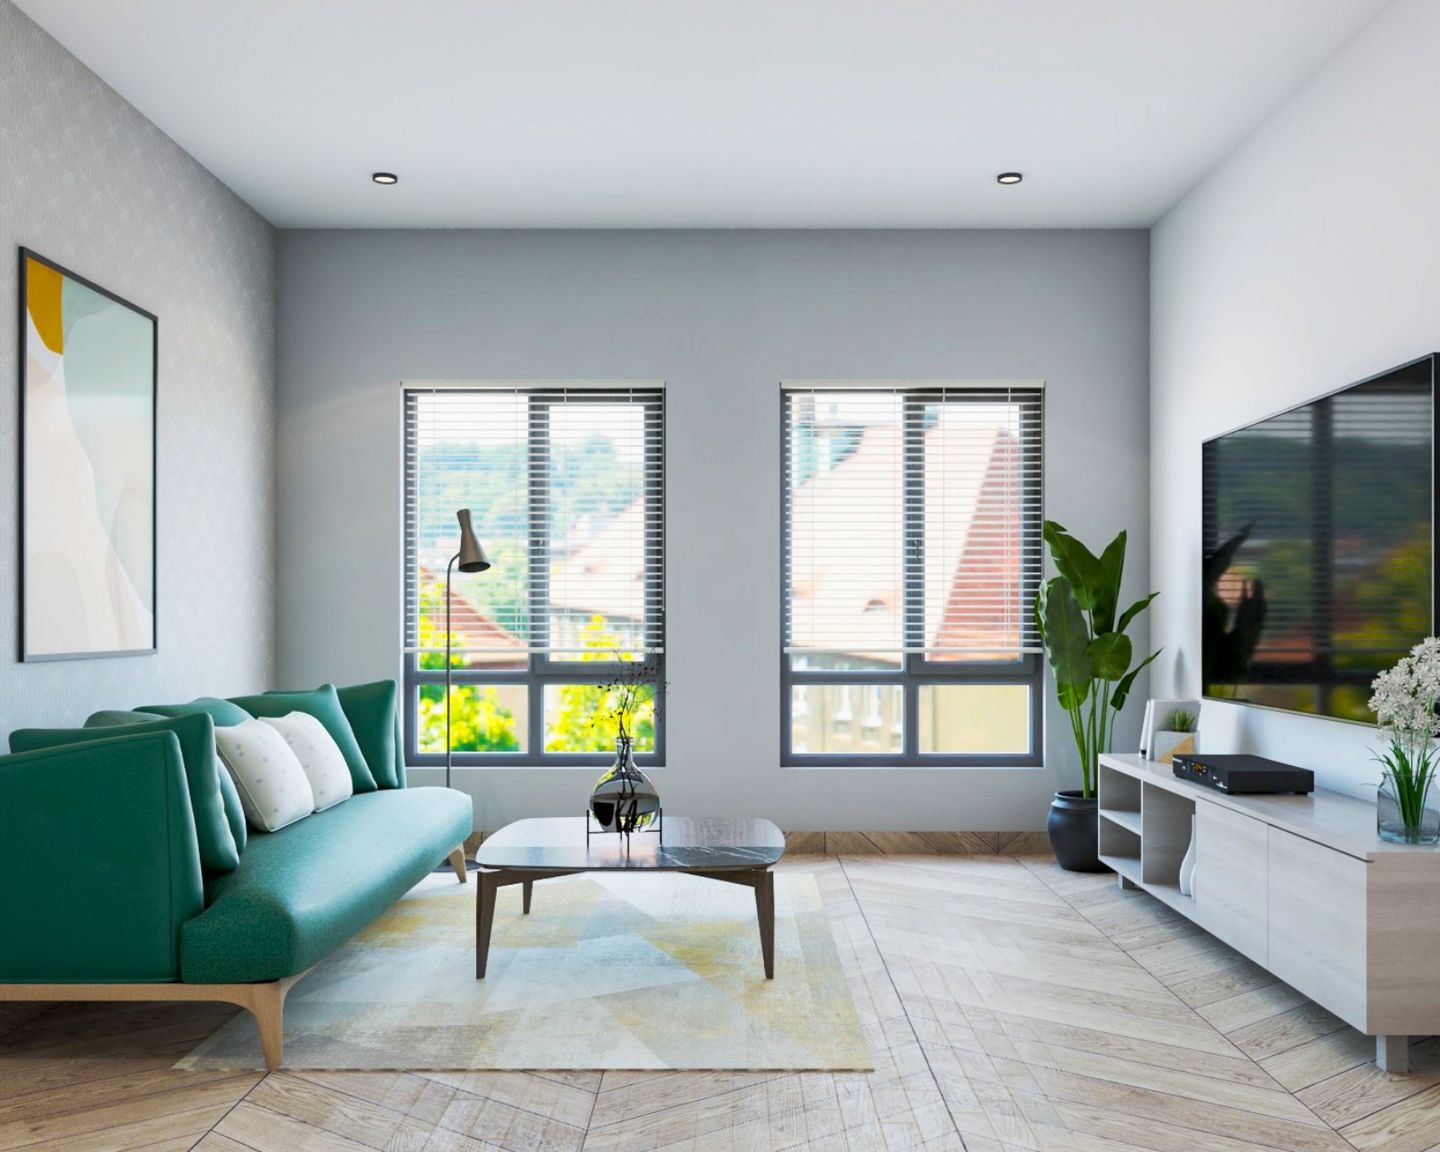 18 m²  Living Room Design With Green Leather Sofa And Floor-Mounted TV Unit - Livspace